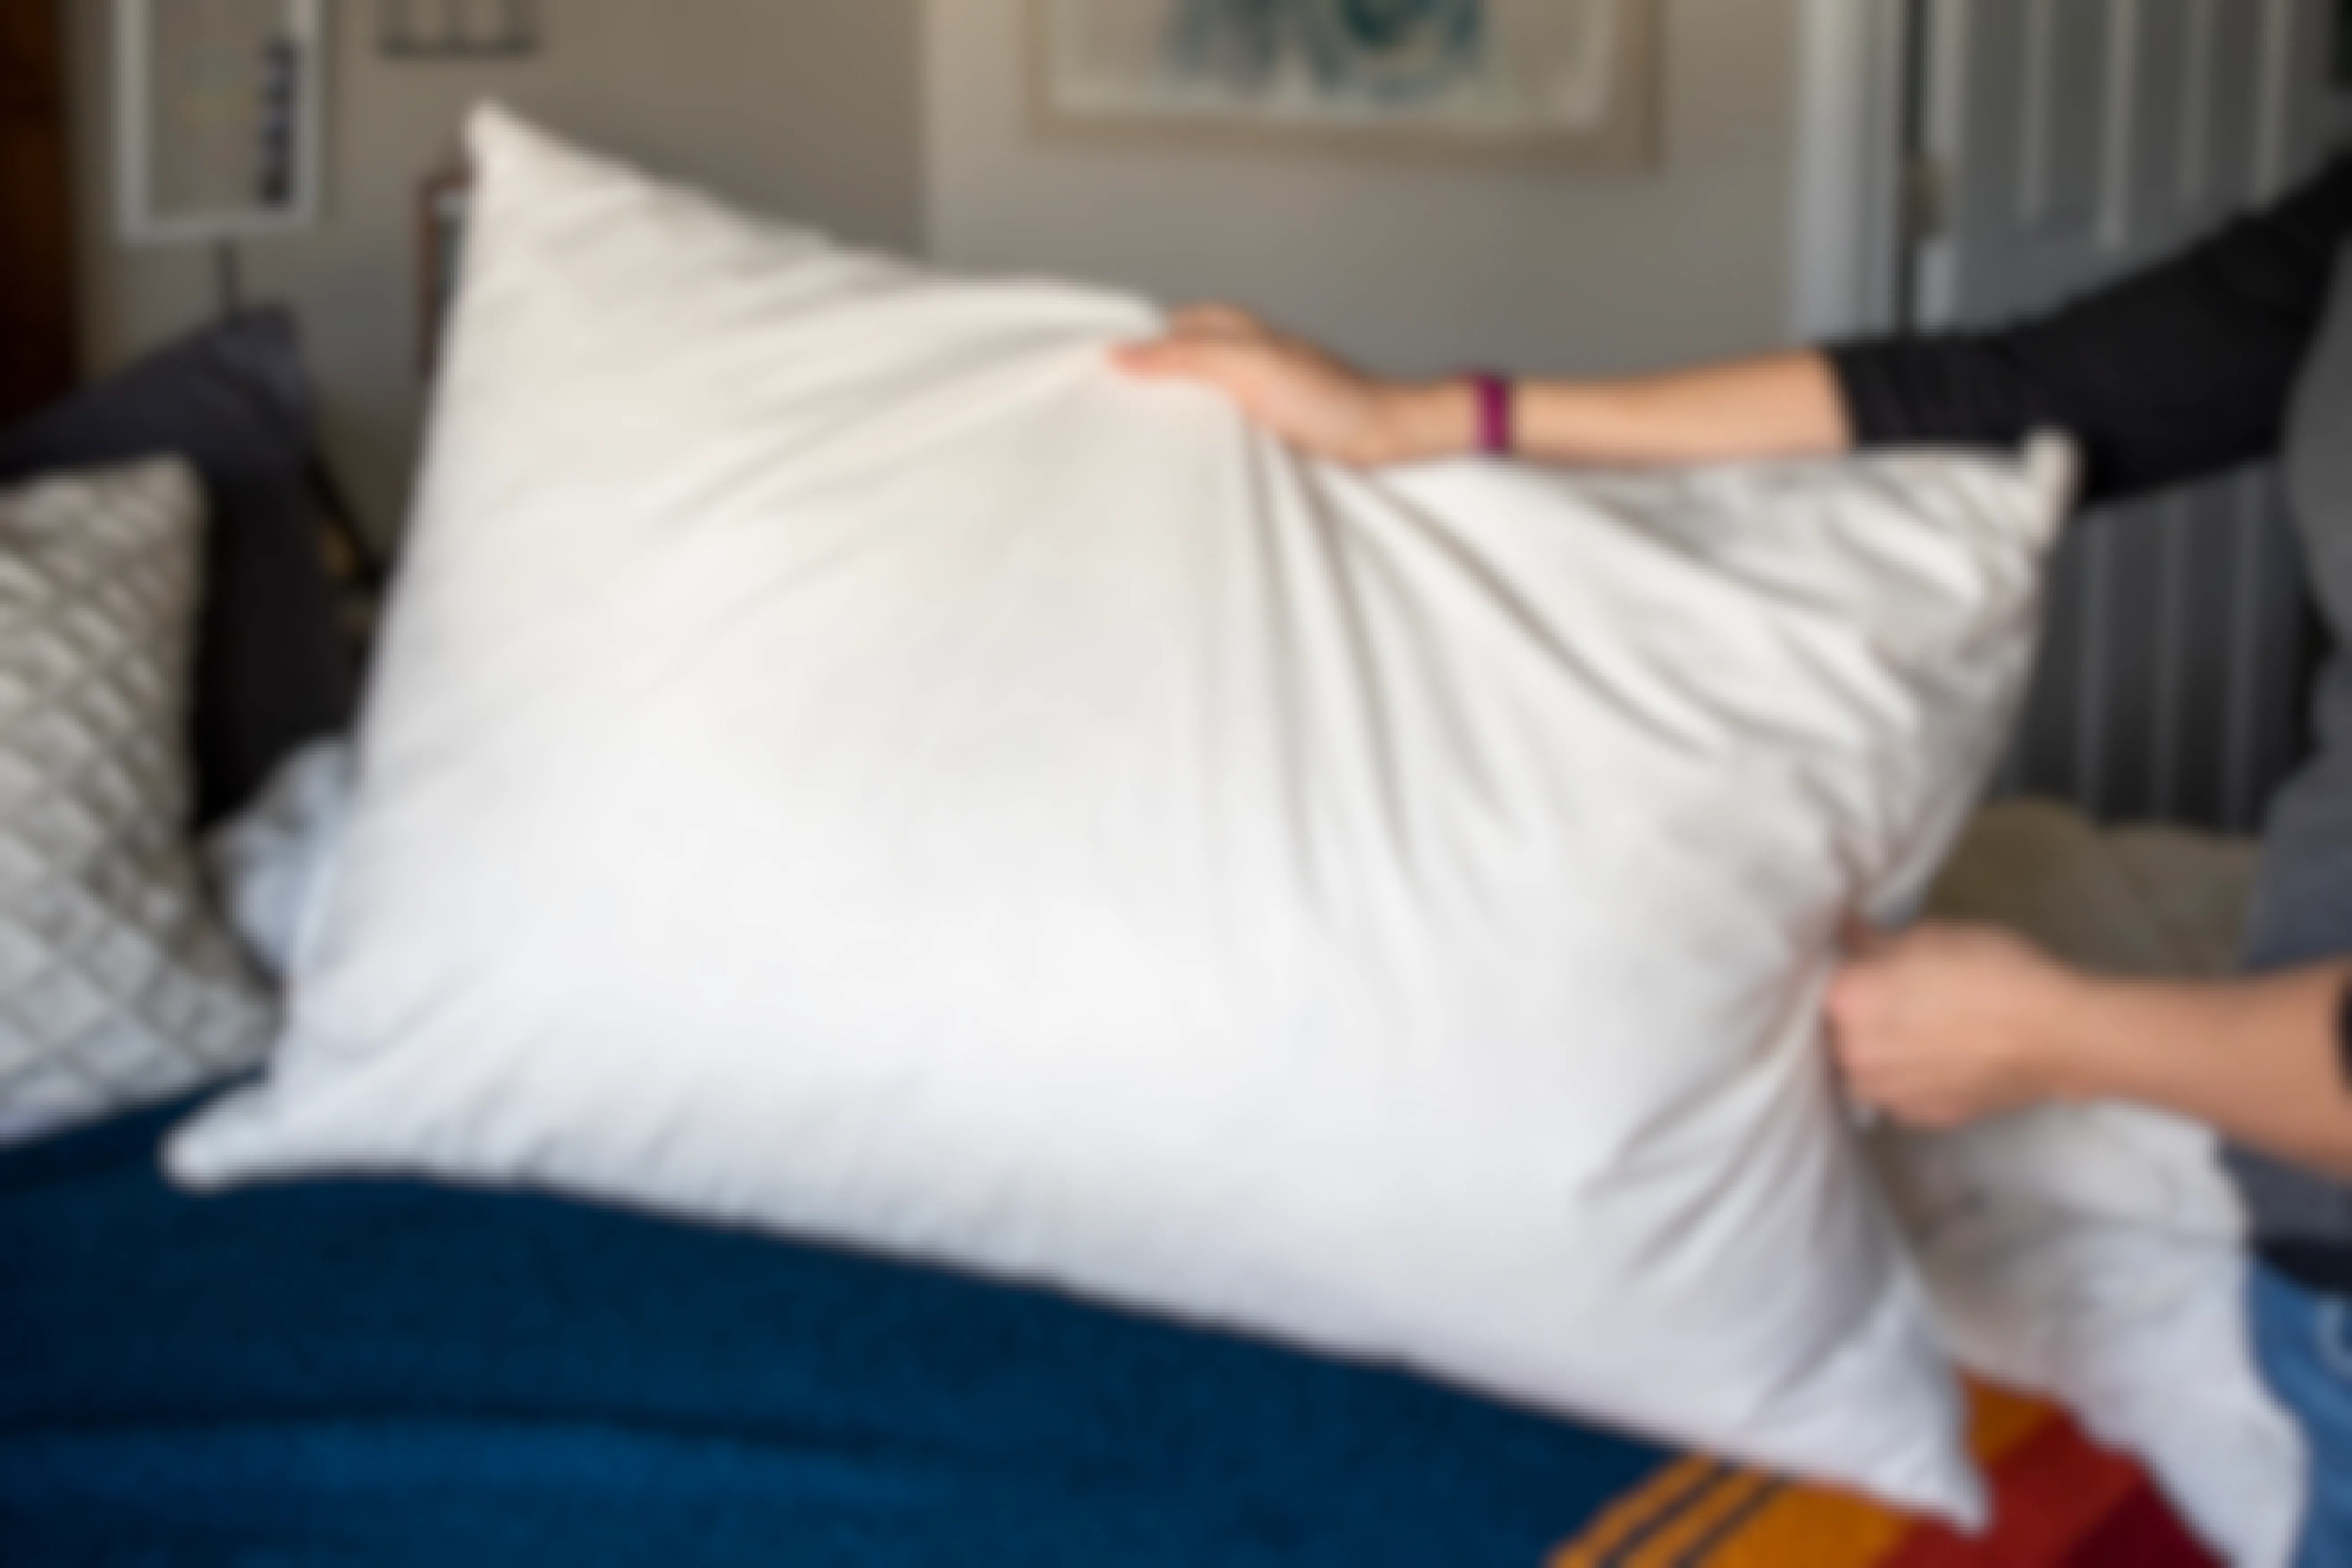 A woman holding a pillow with no pillow case over a bed.